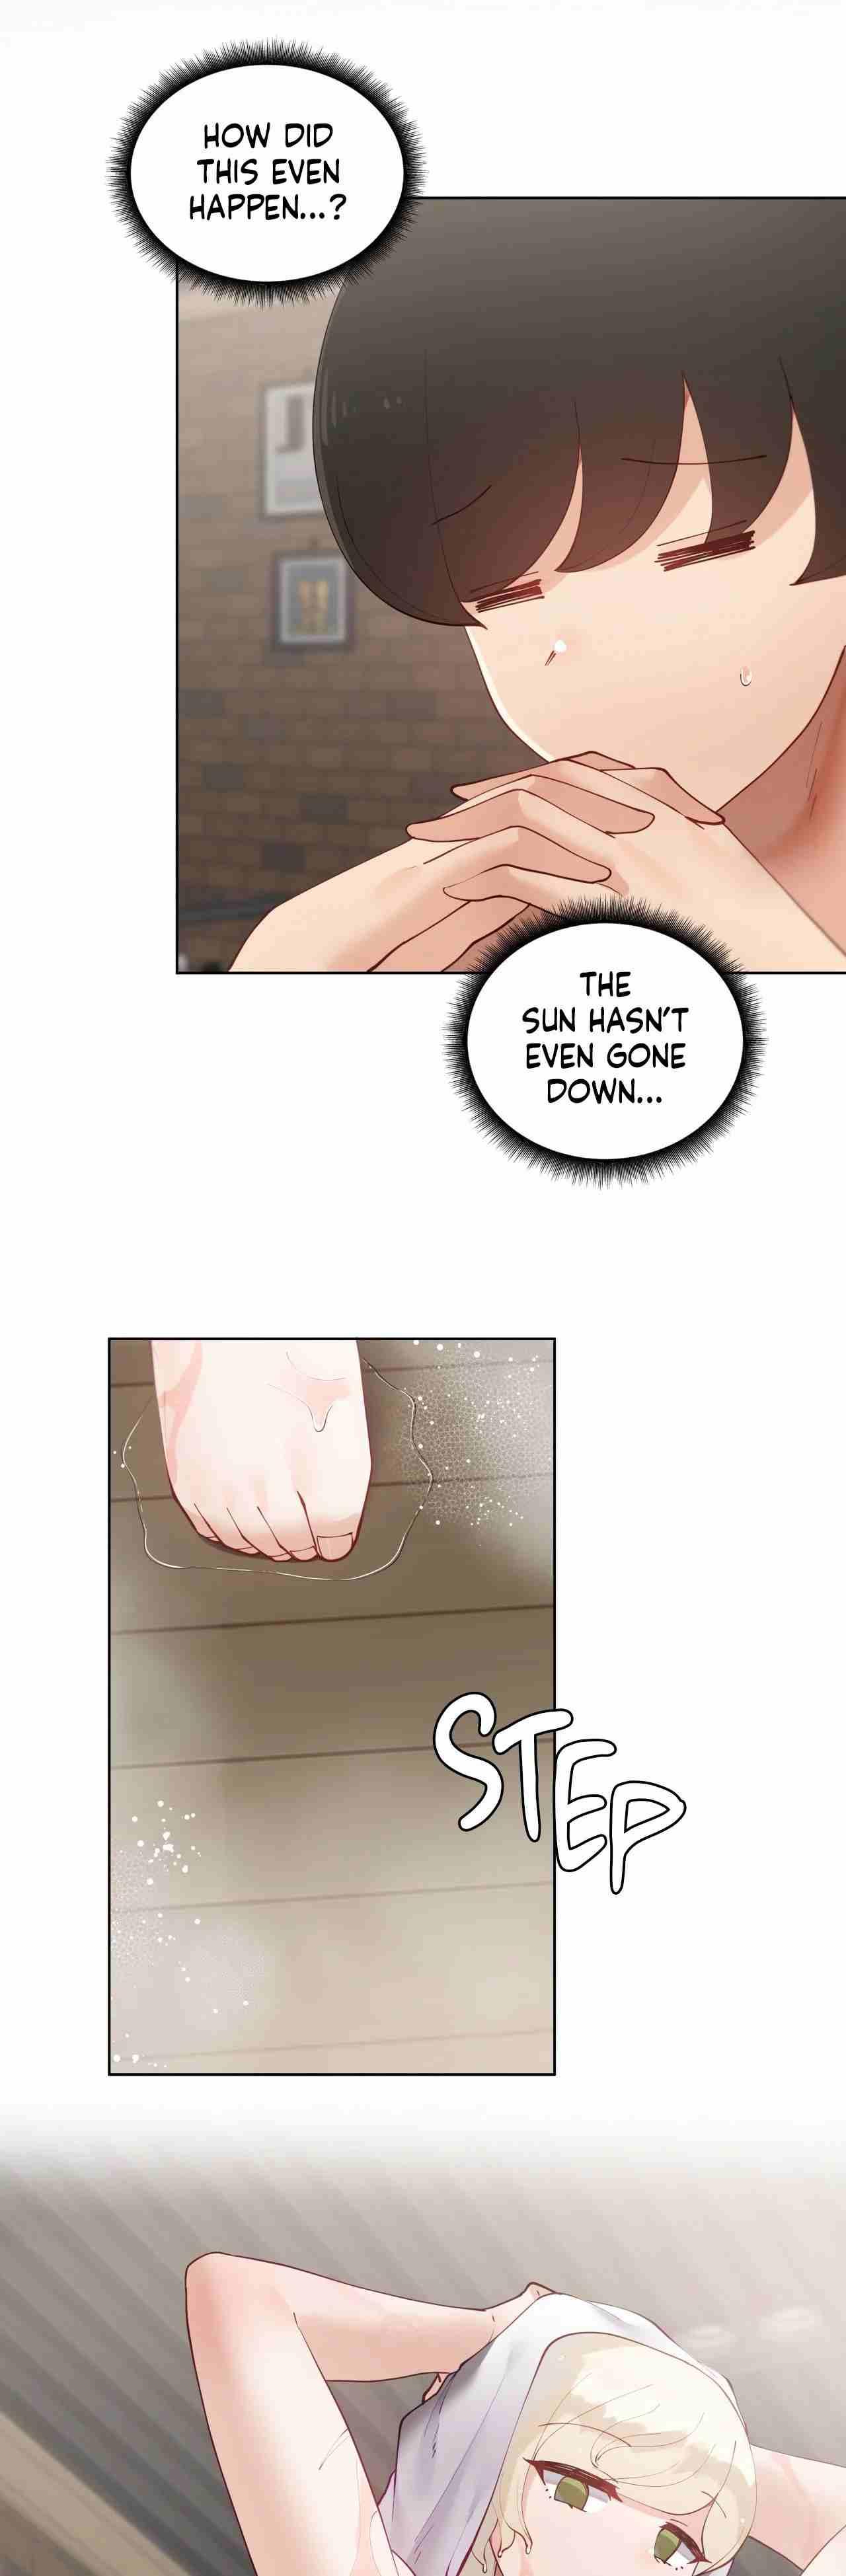 Porno 18 [Over.J, Choi Tae-young] Learning the Hard Way 2nd Season (After Story) Ch.1/? [English] [Manhwa PDF] Ongoing Public Nudity - Page 3